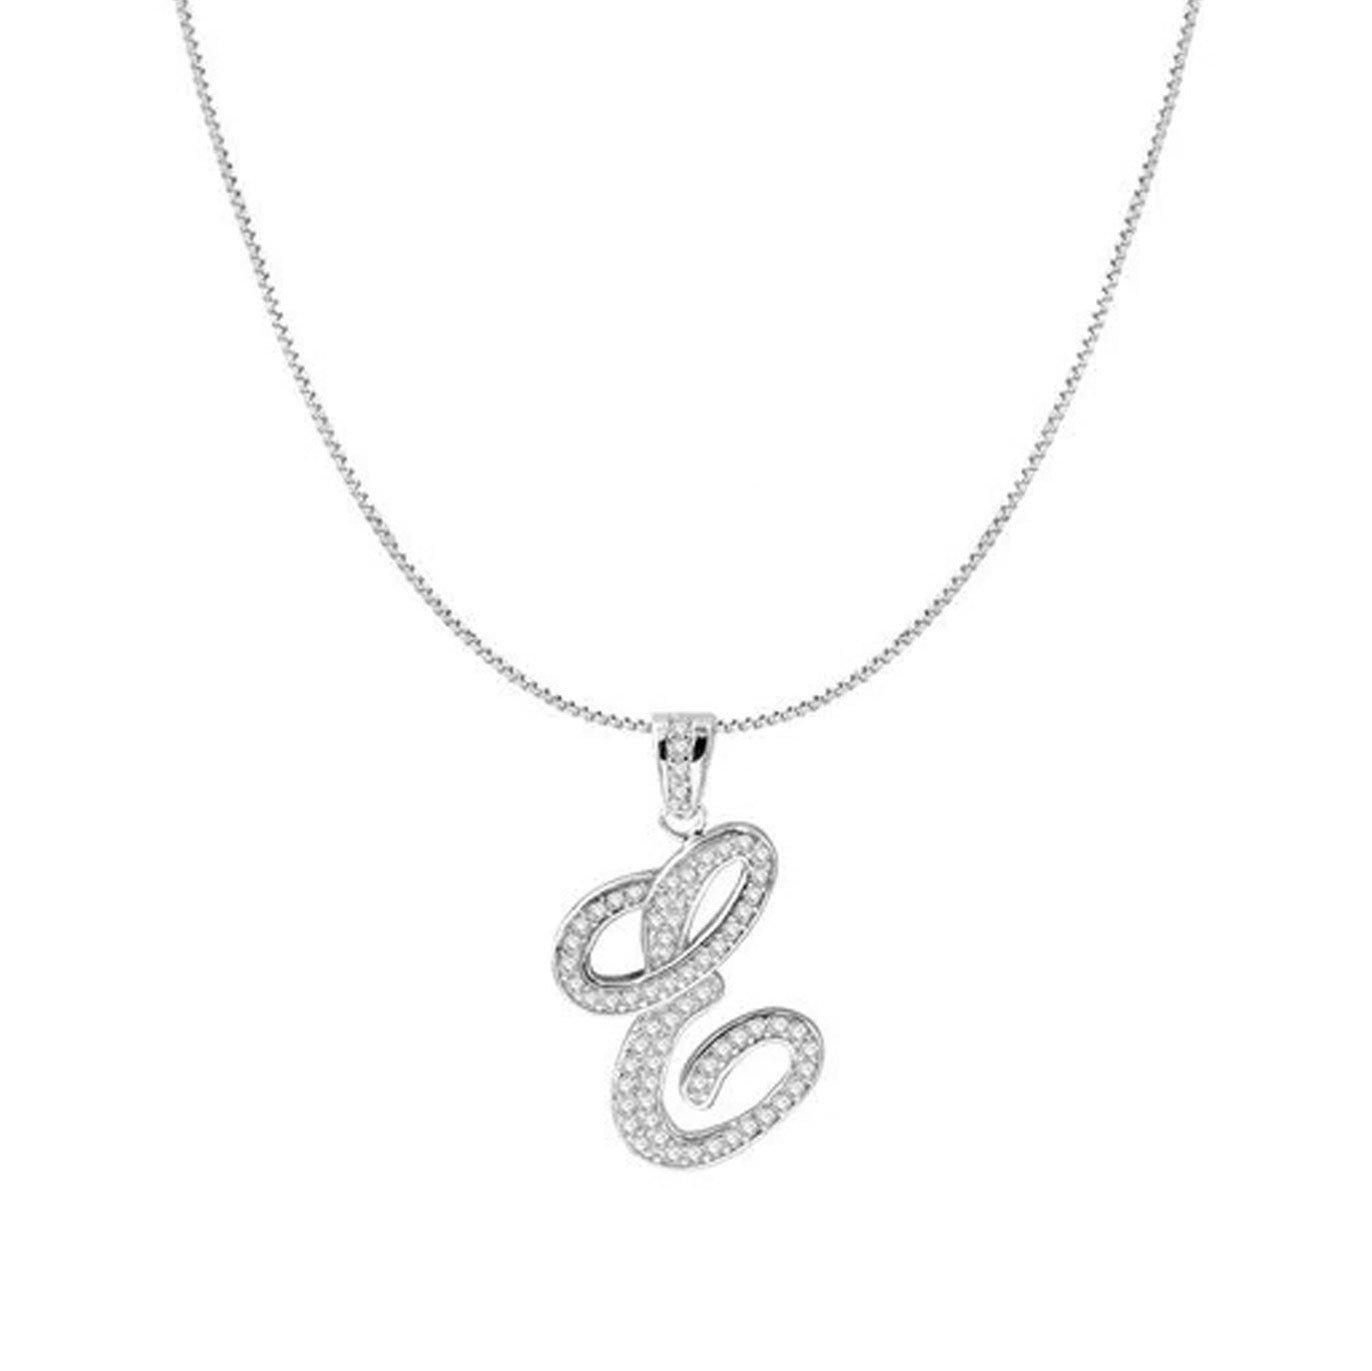 Personalized Cursive-Style Letter M Initial Pendant/Necklace in Sterling  Silver - 18\ | Silver initial pendant, Initial pendant necklace, Initial  pendant